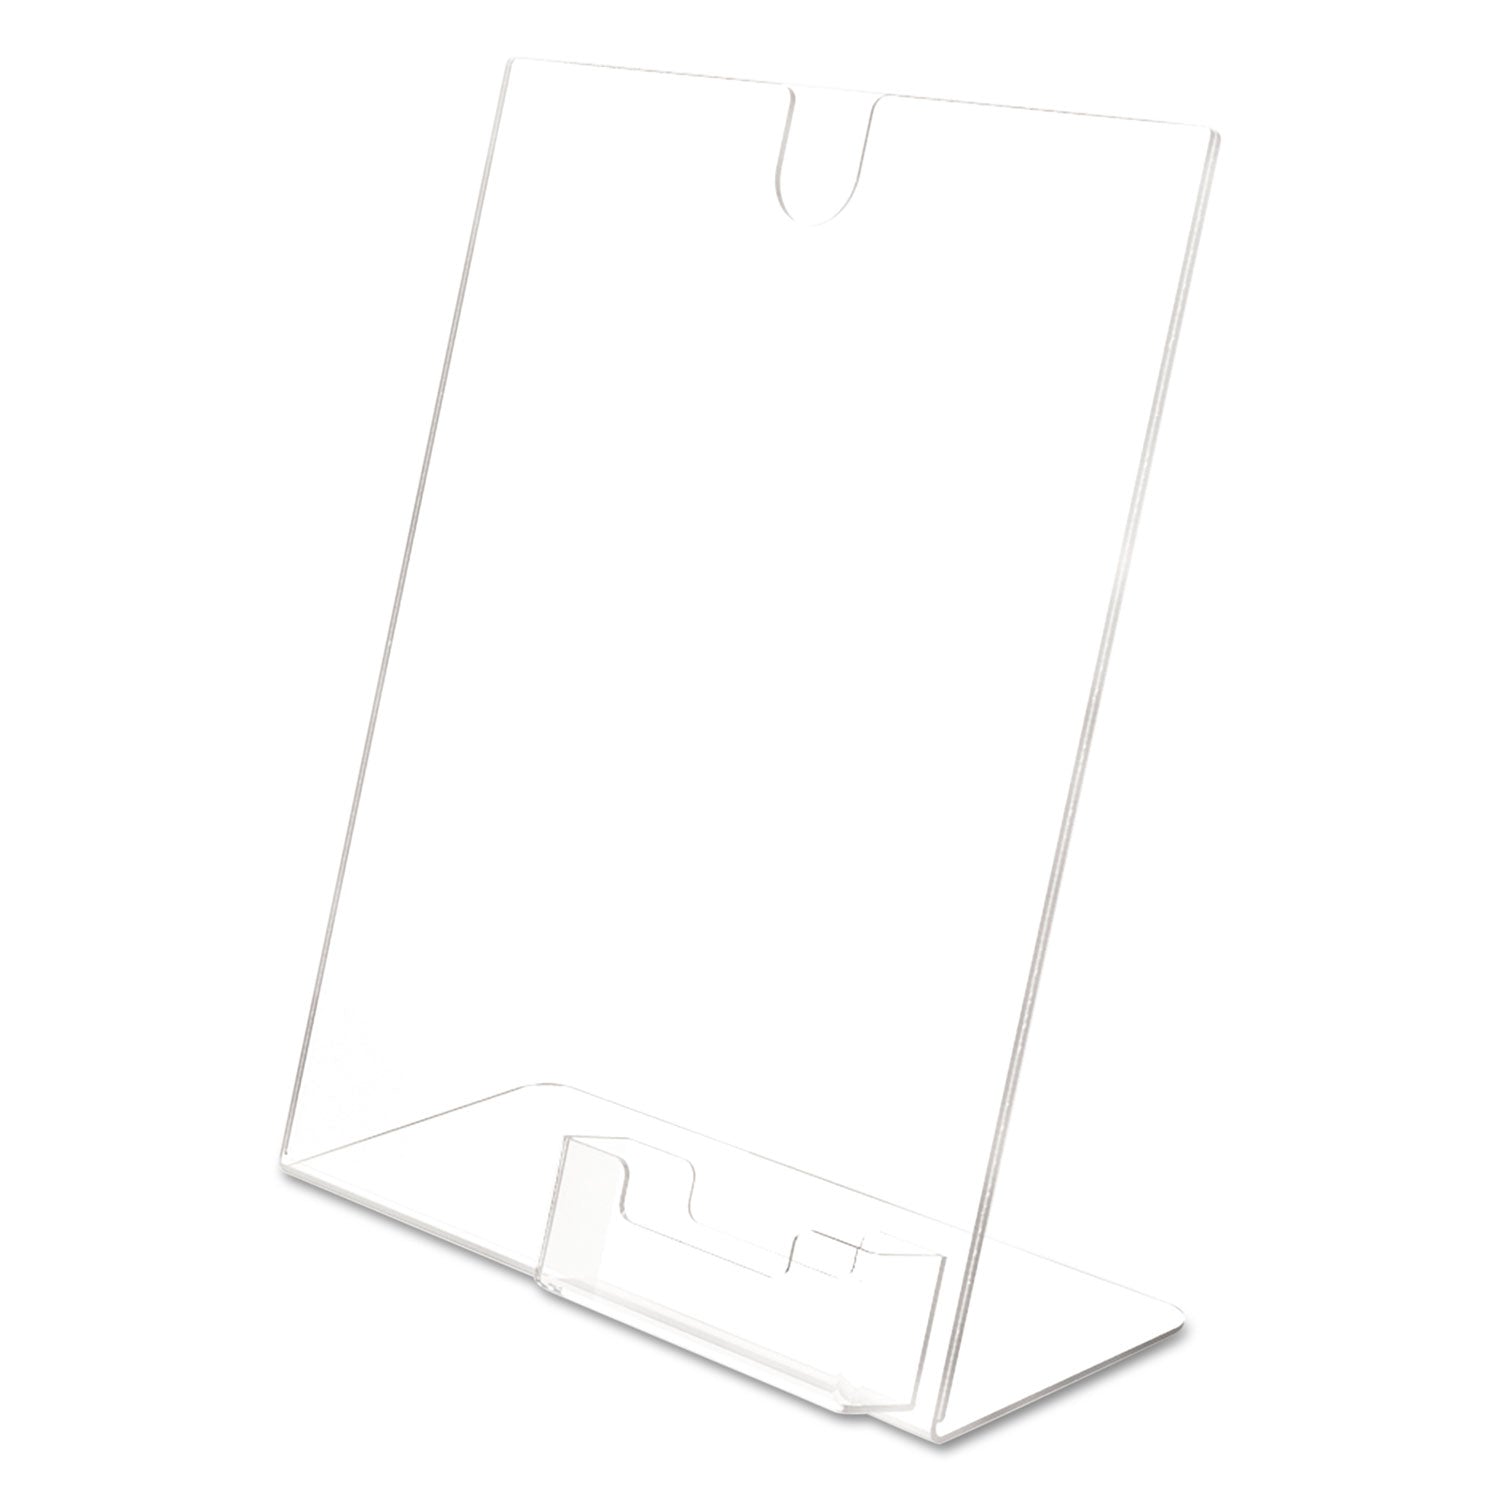 Superior Image Slanted Sign Holder with Business Card Holder, 8.5w x 4.5d x 11h, Clear - 